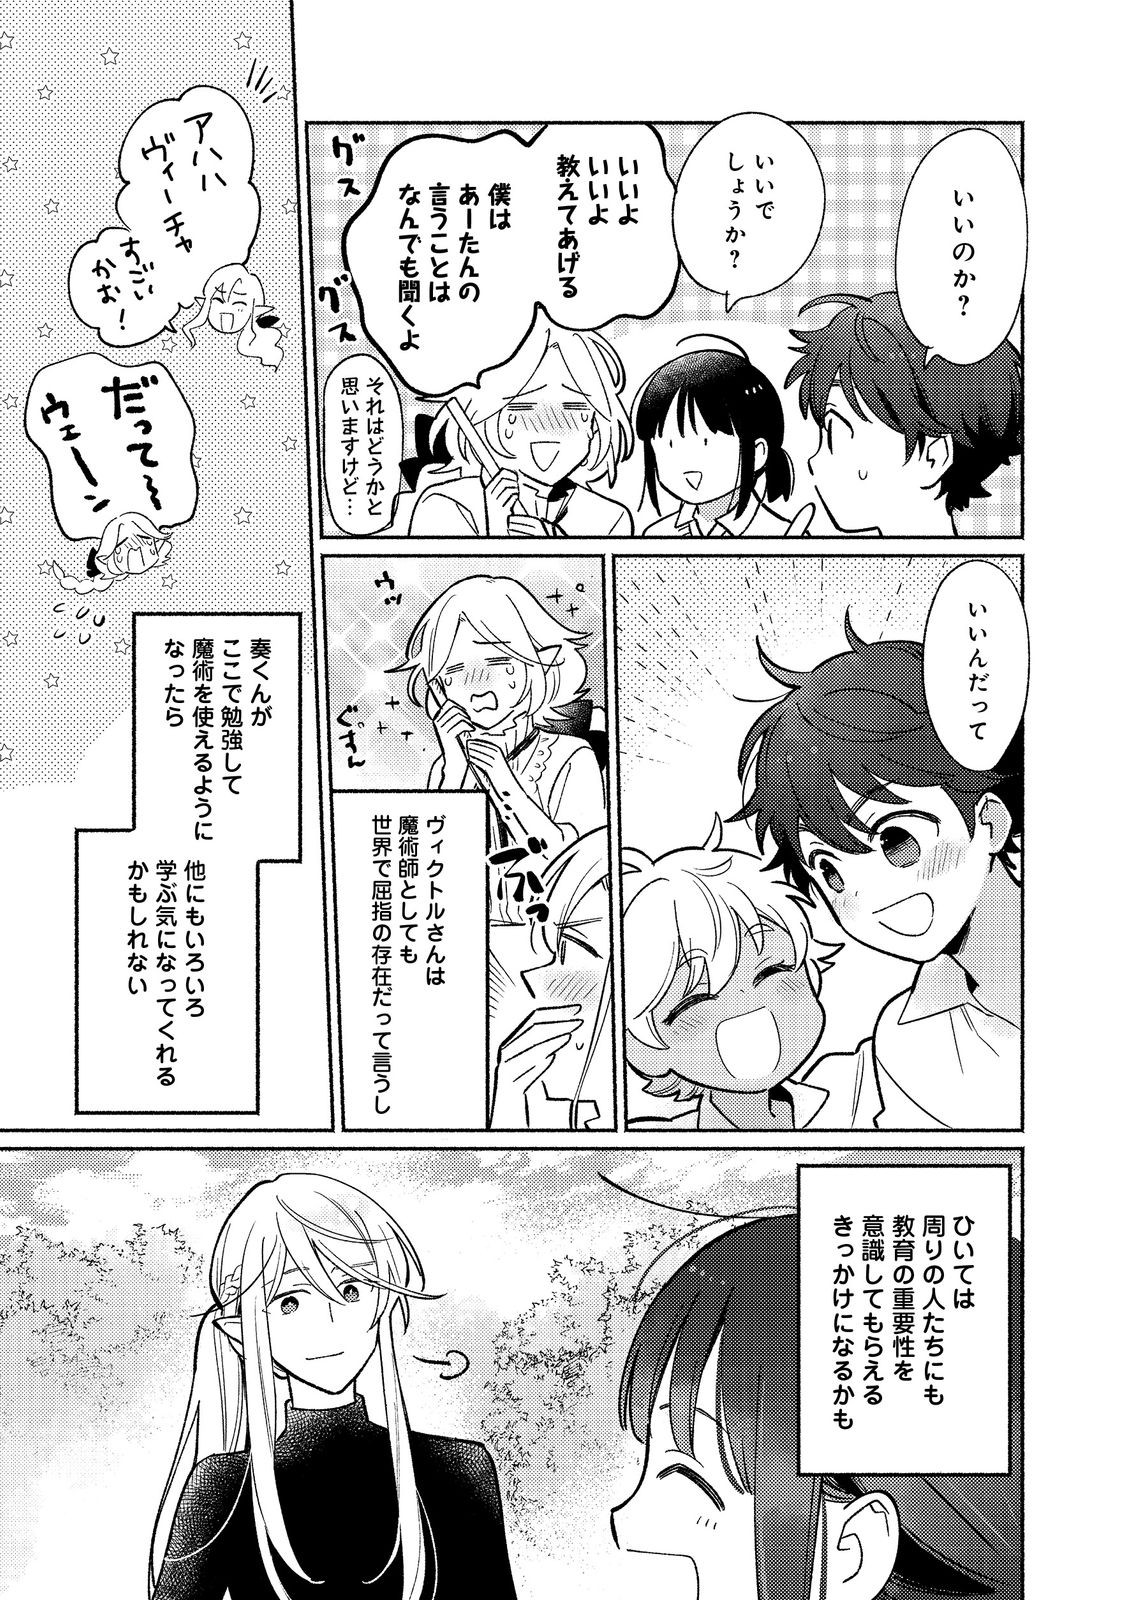 I’m the White Pig Nobleman 第18.2話 - Page 14